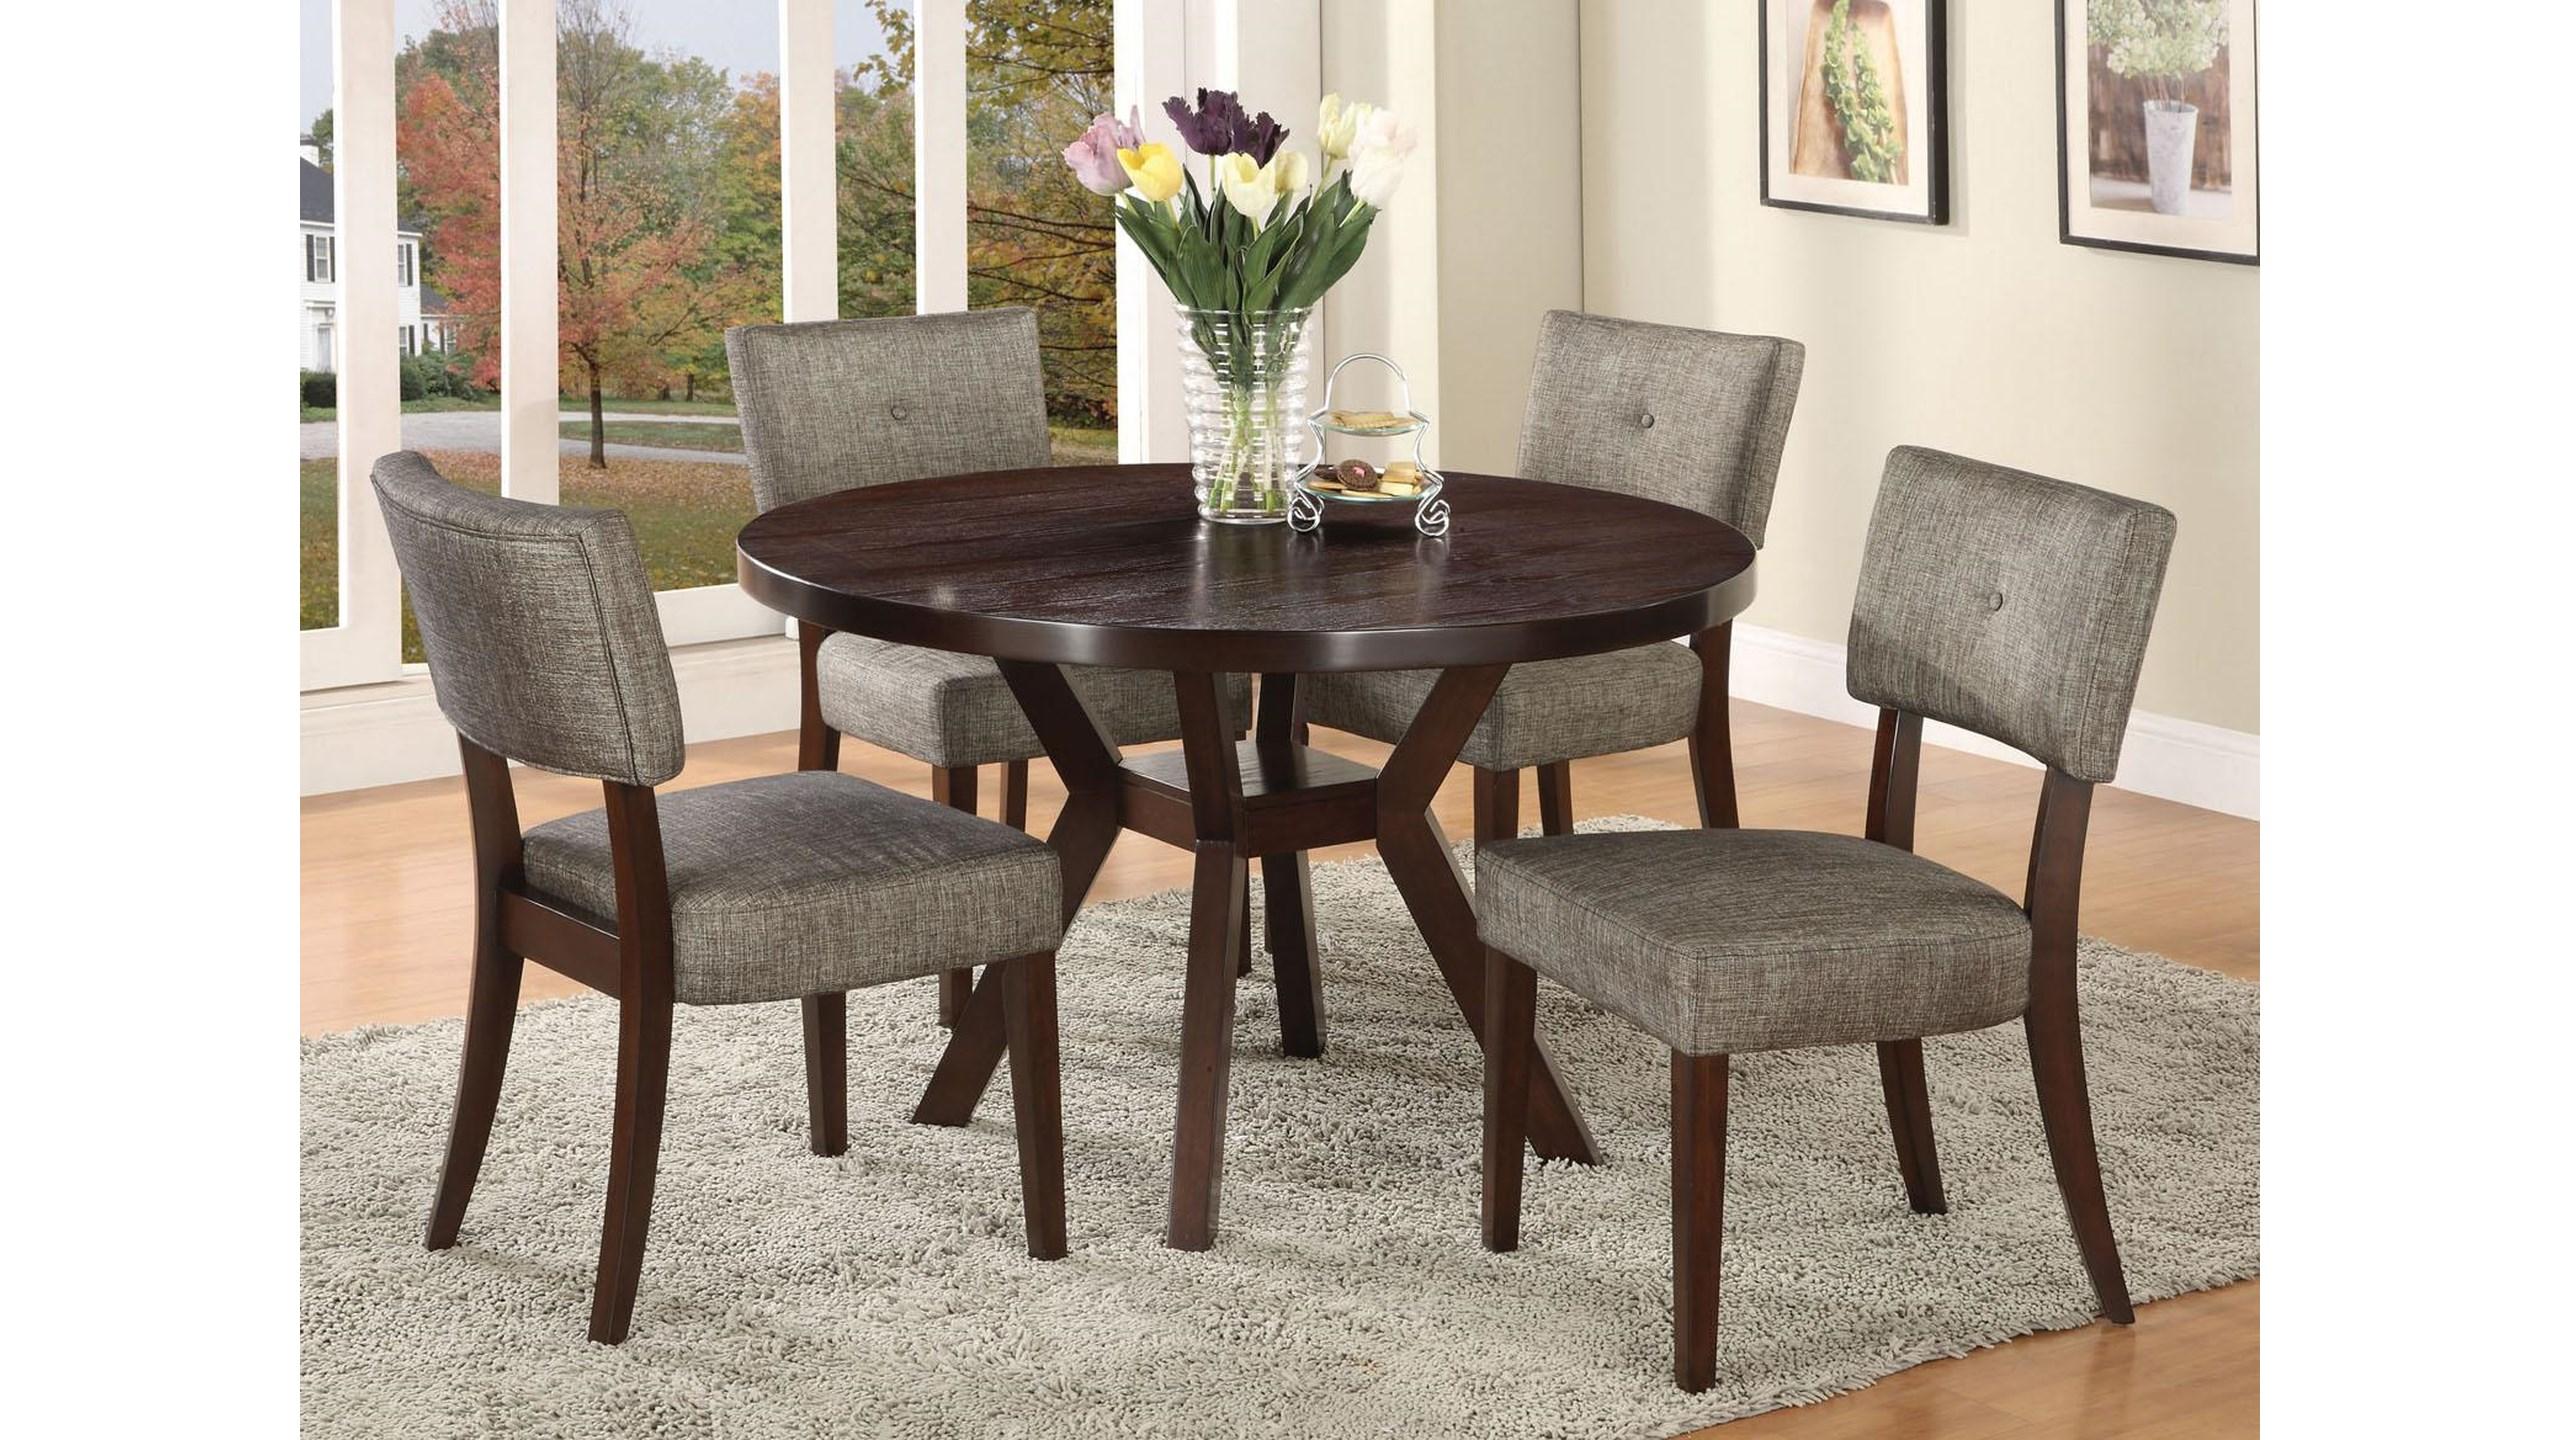 Traditional Dining Room Set Drake 16250-5pcs in Espresso Fabric